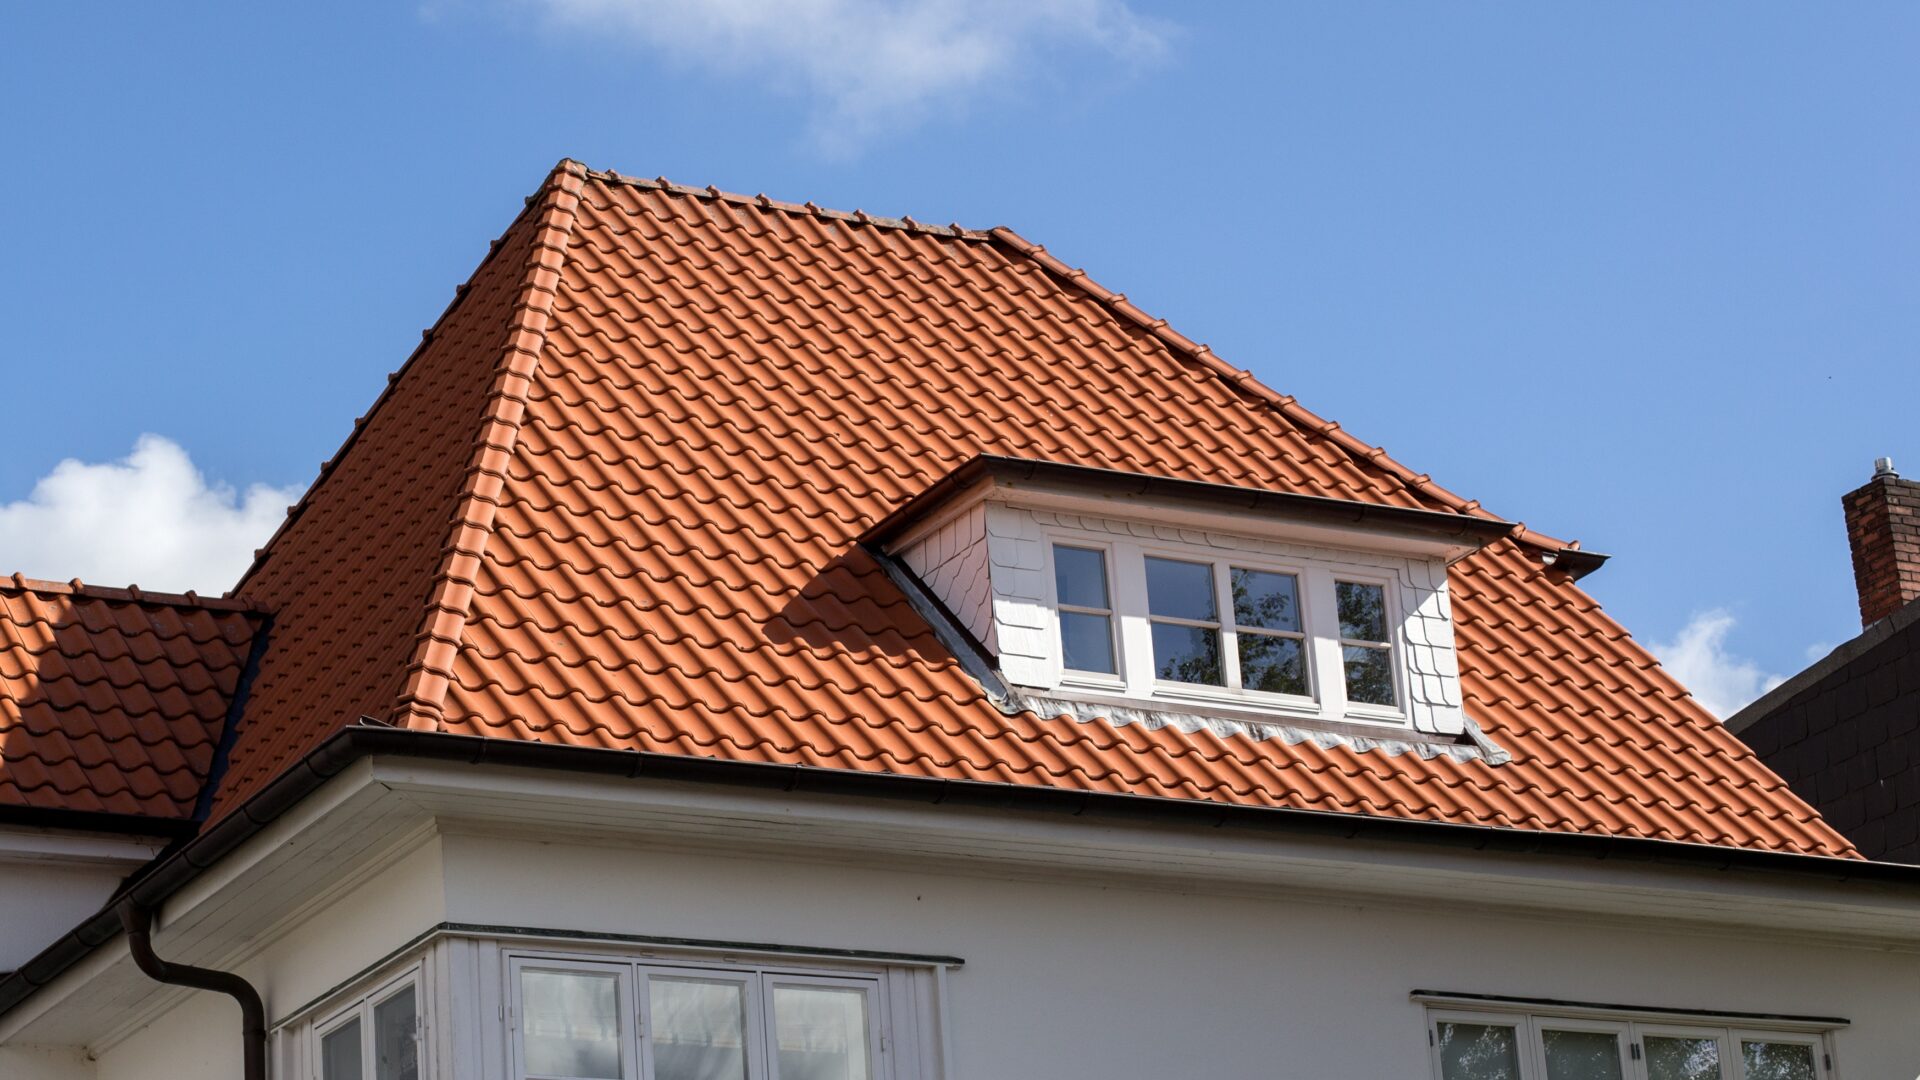 A white-sided home with orange tile roofing